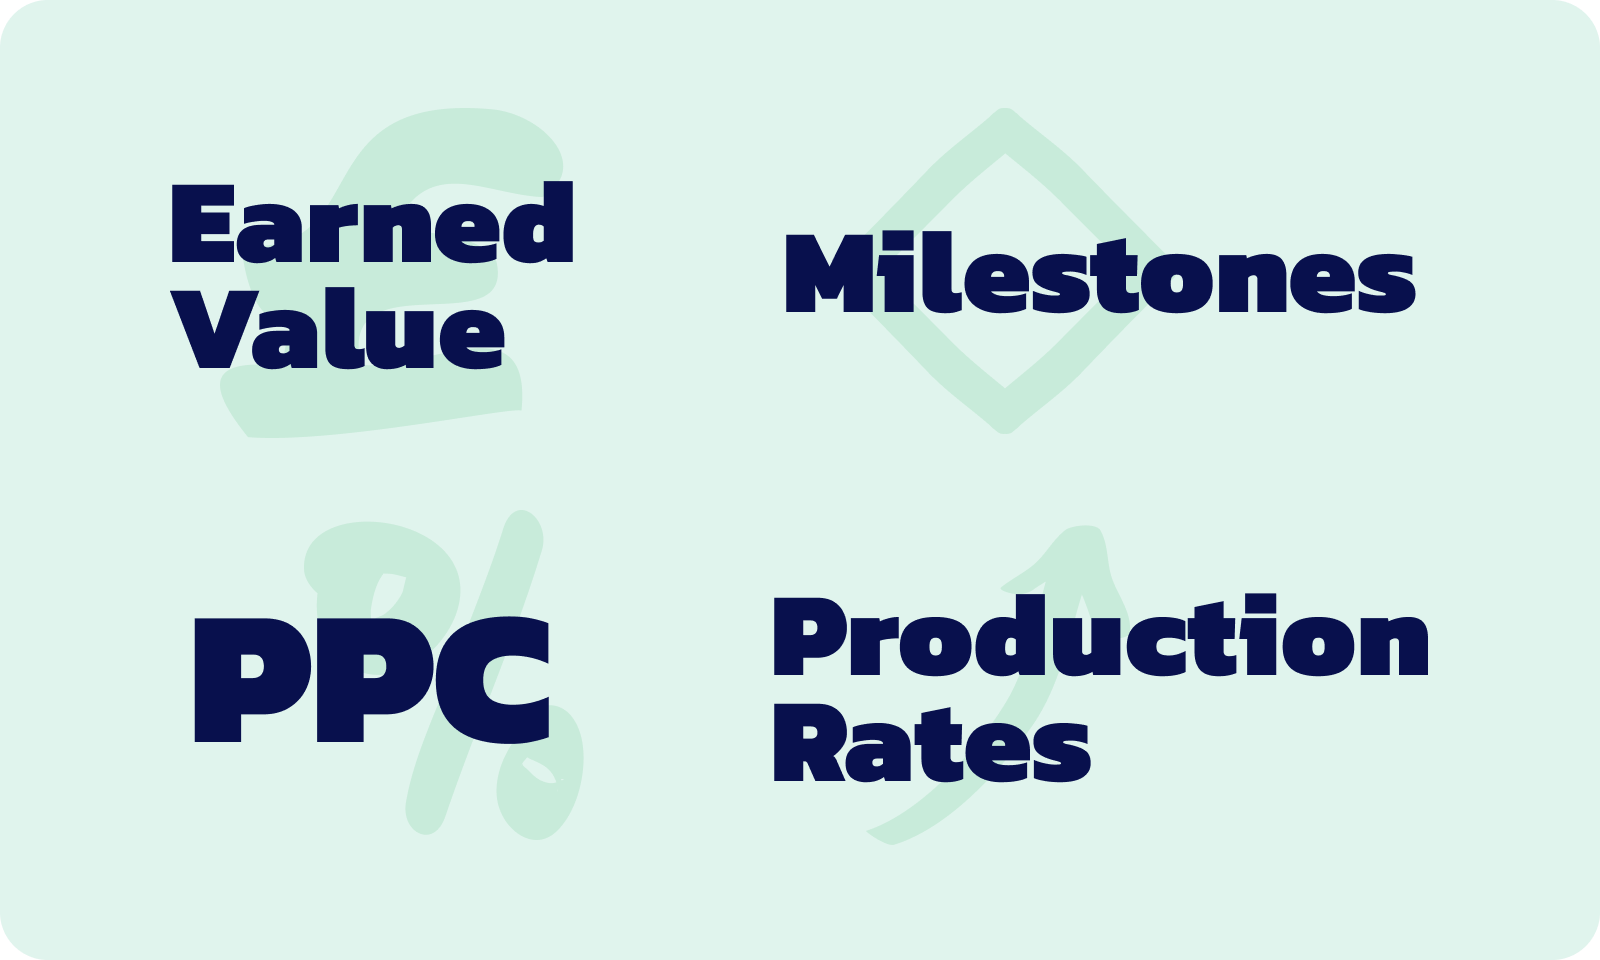 Earned Value, PPC, Milestone Tracking, and Production Rates.